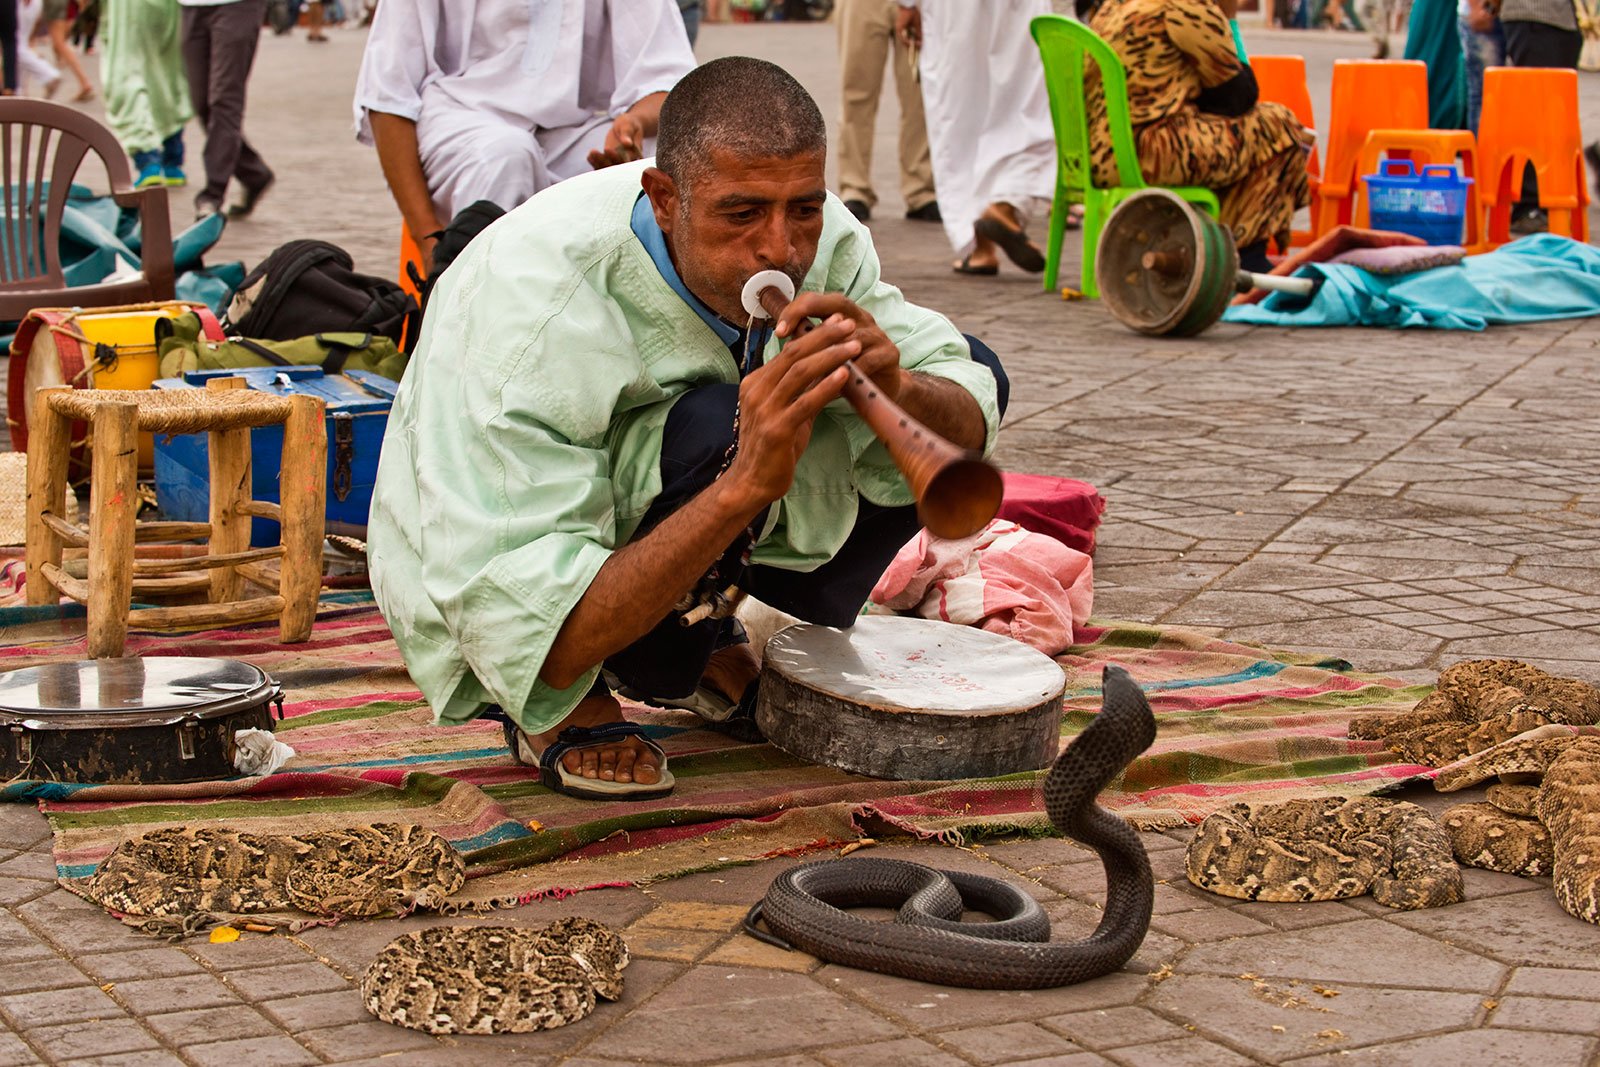 How to see snake charmers in Marrakesh